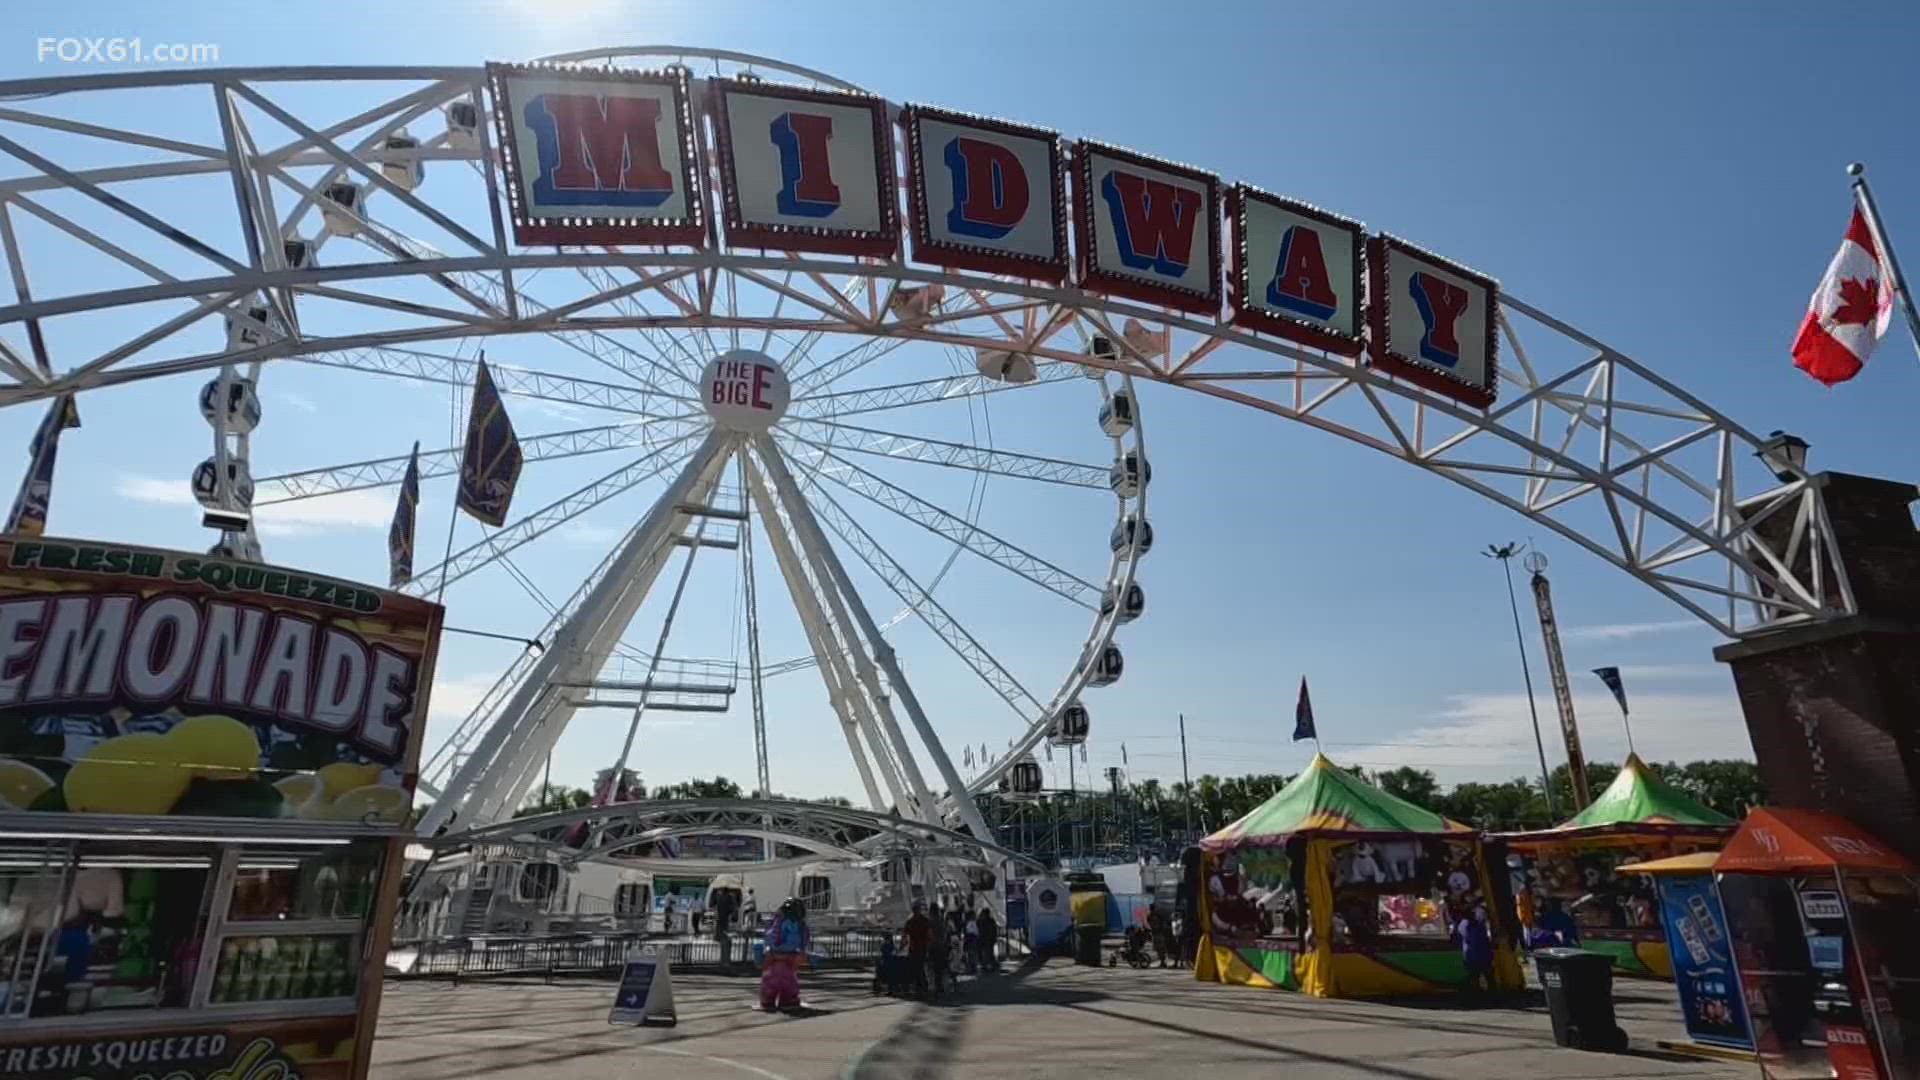 This is the 106th edition of the Big E that draws in crowds from across New England.